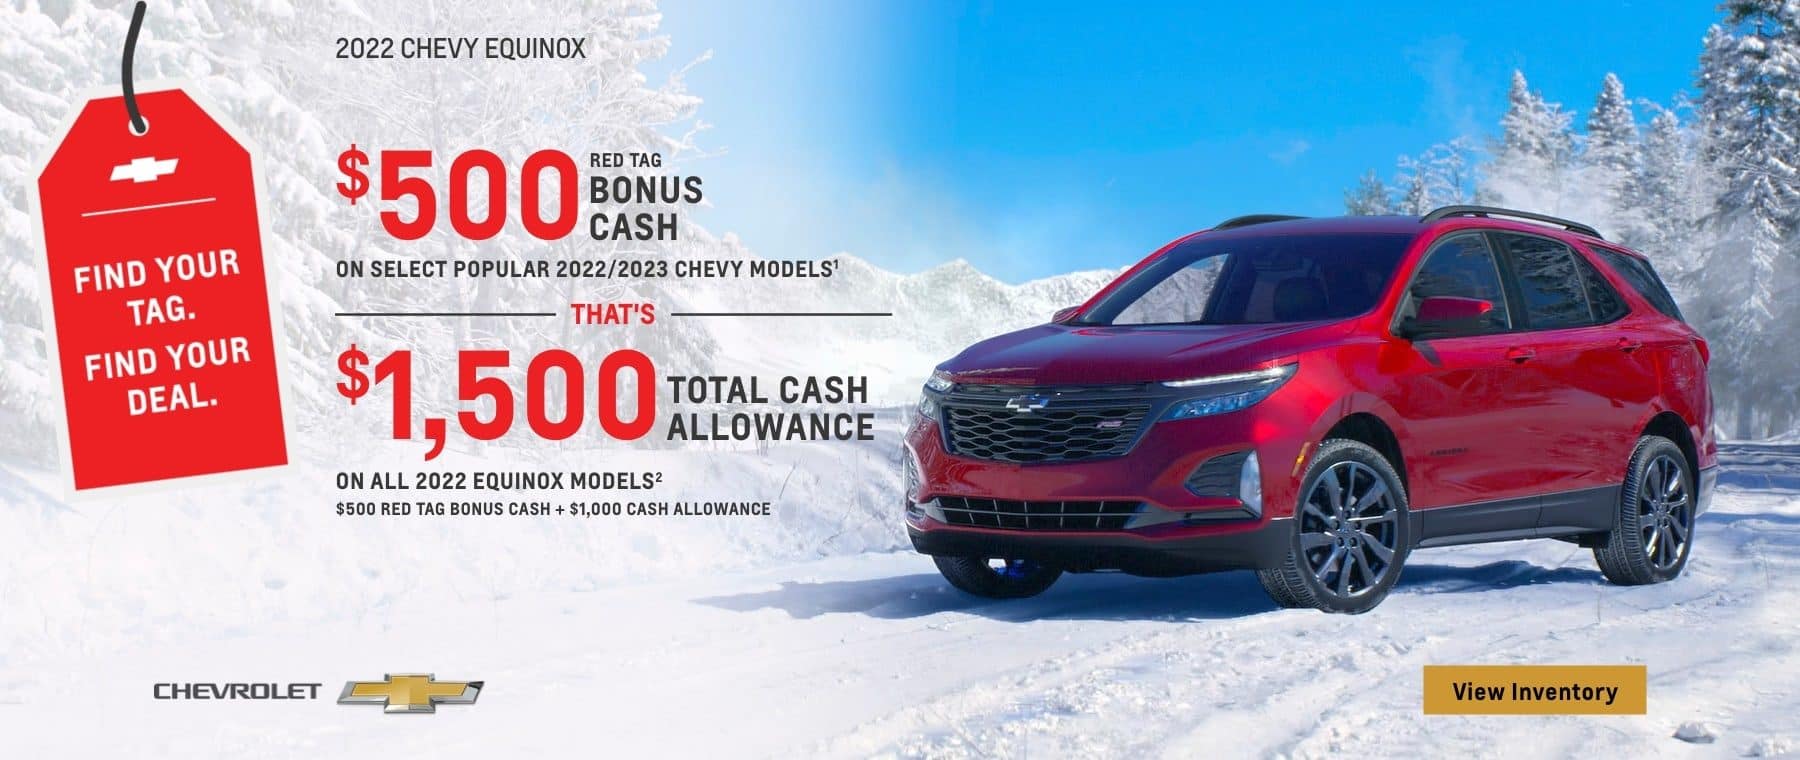 $500 Red Tag Bonus Cash on select popular 2022/2023 Chevy models. That's $1,500 total cash allowance on all 2022 Equinox models. $500 Red Tag Bonus Cash + $1,000 Cash Allowance.